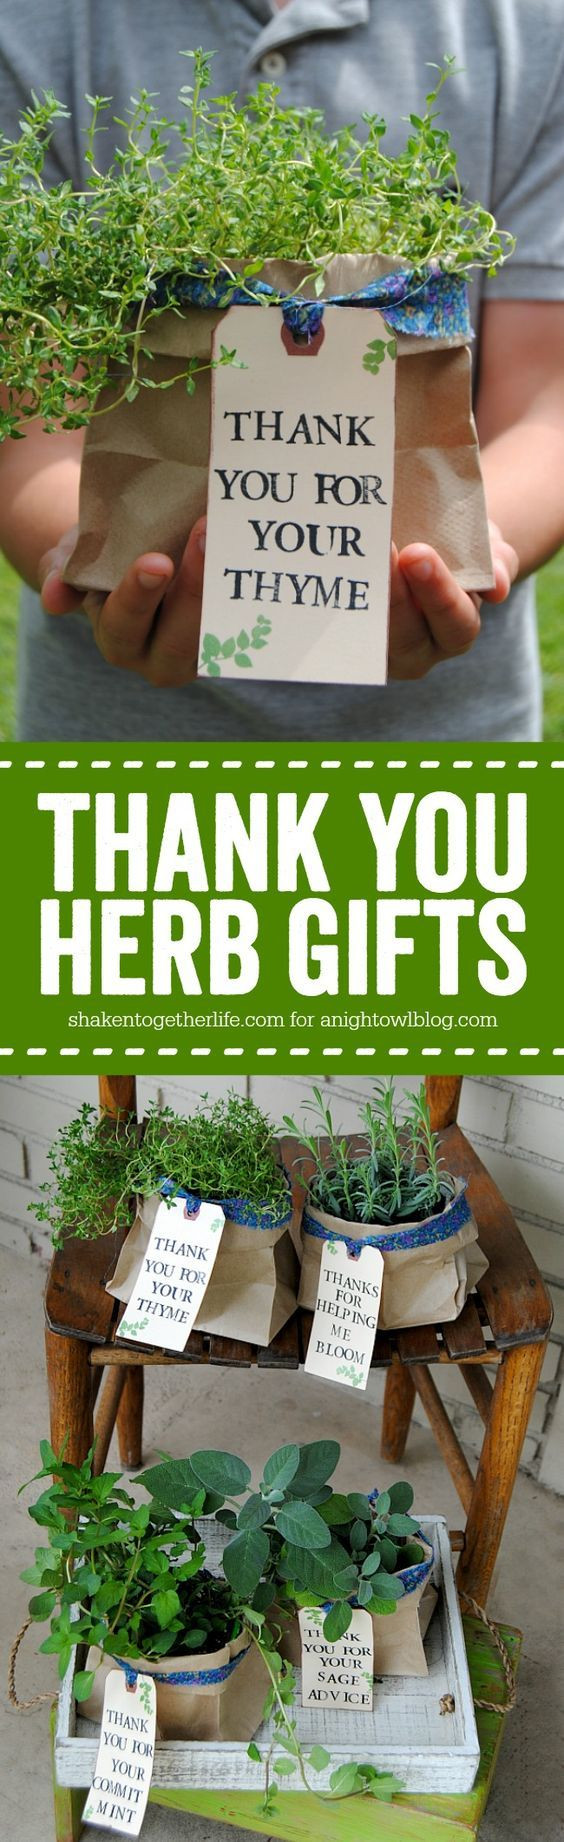 Thank You Gift Ideas For Coworkers Homemade
 Best 25 Volunteer ts ideas on Pinterest